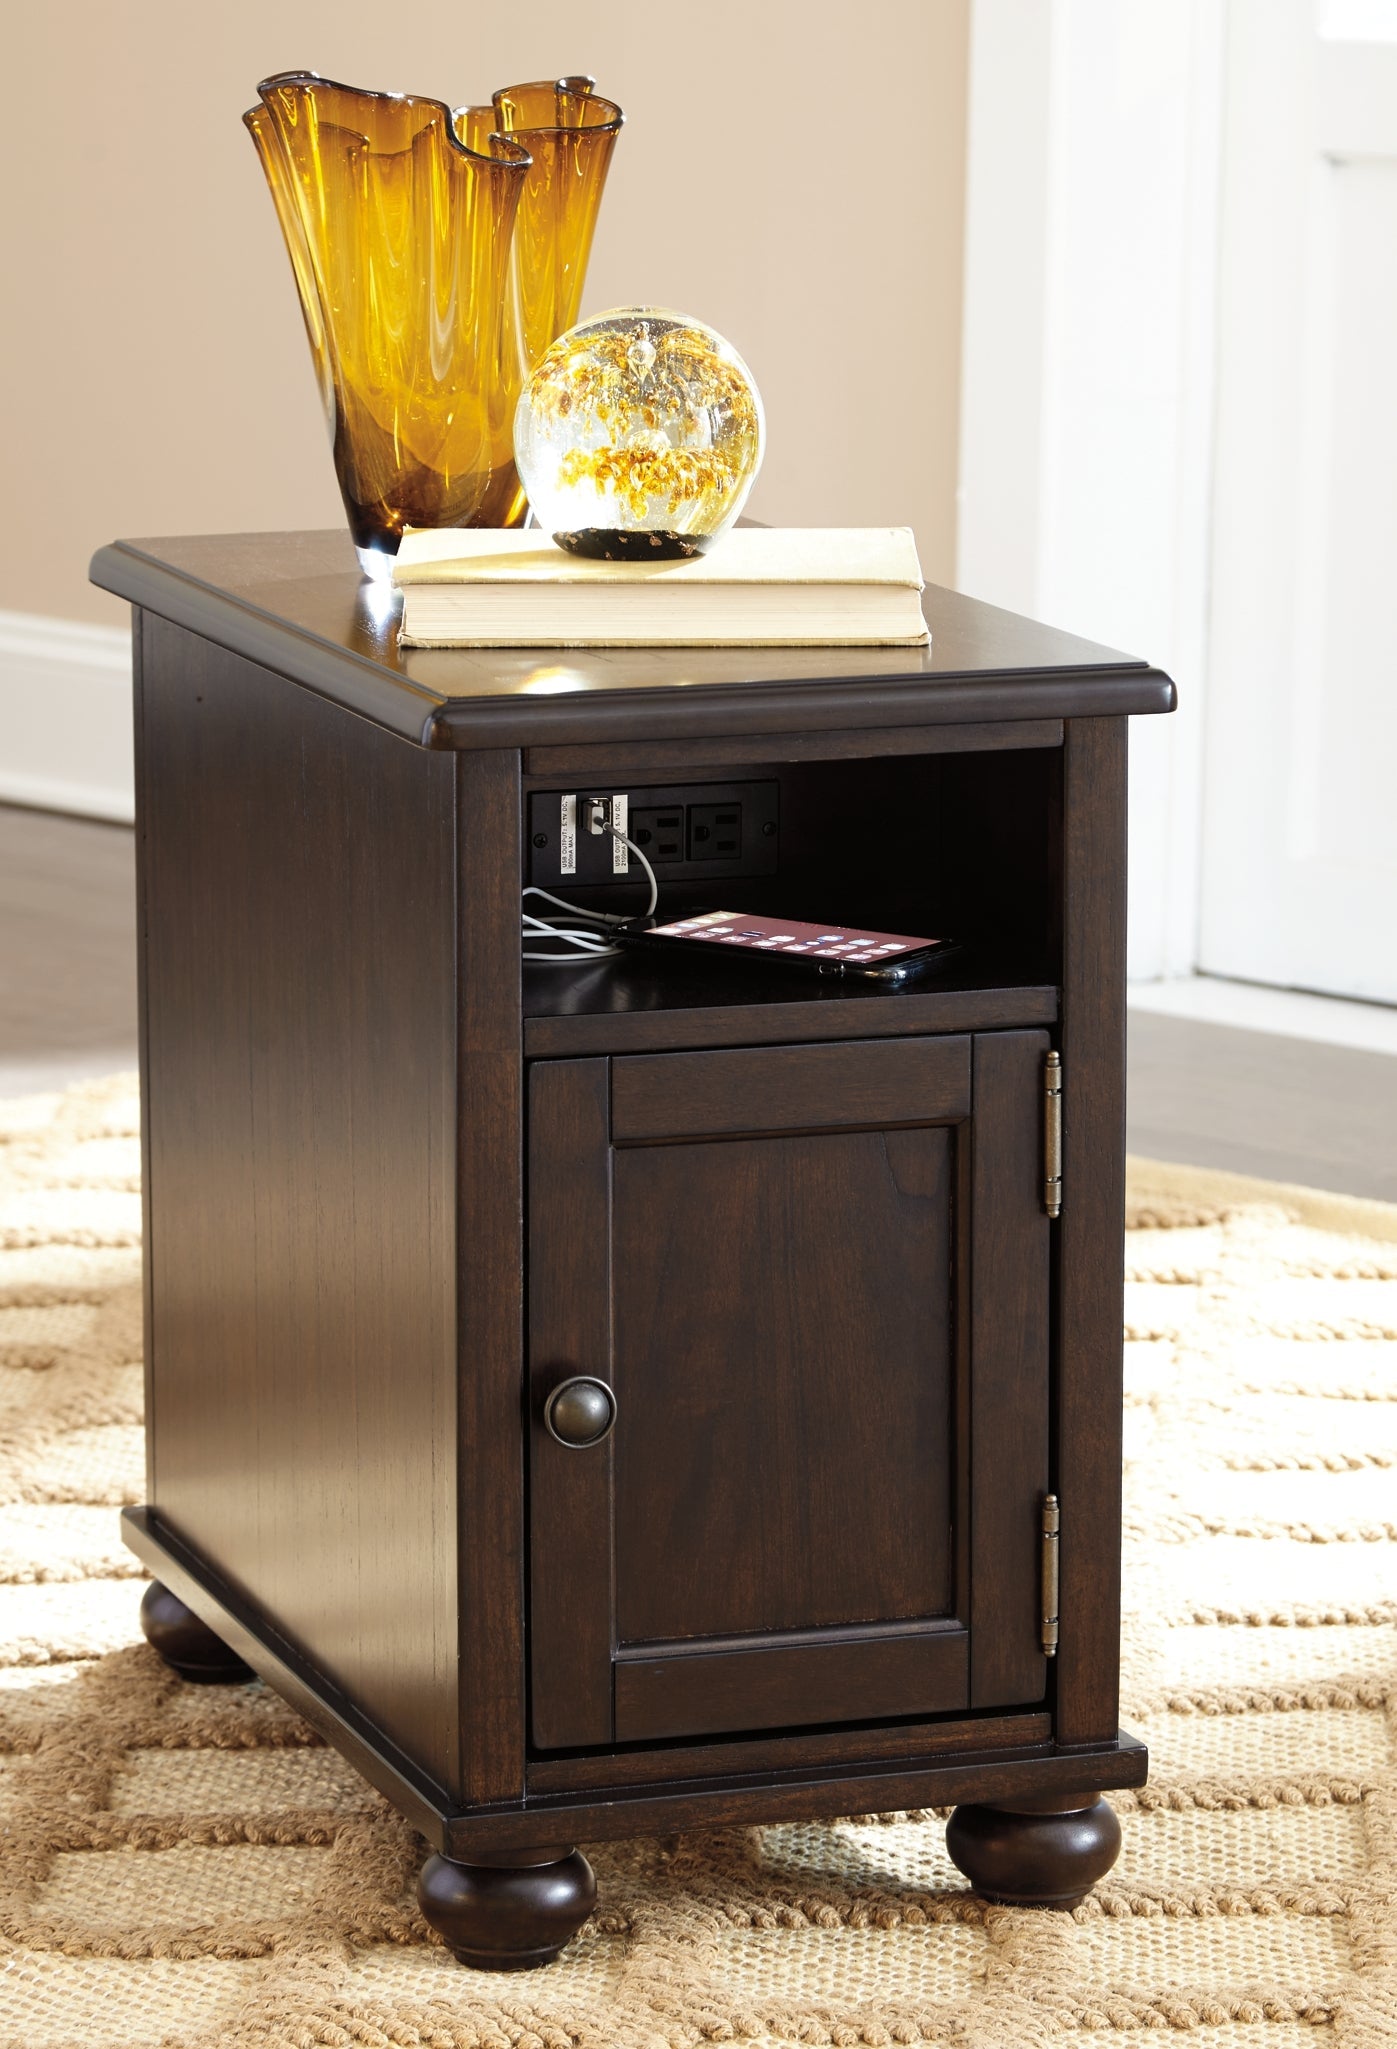 Barilanni 2 End Tables Rent Wise Rent To Own Jacksonville, Florida